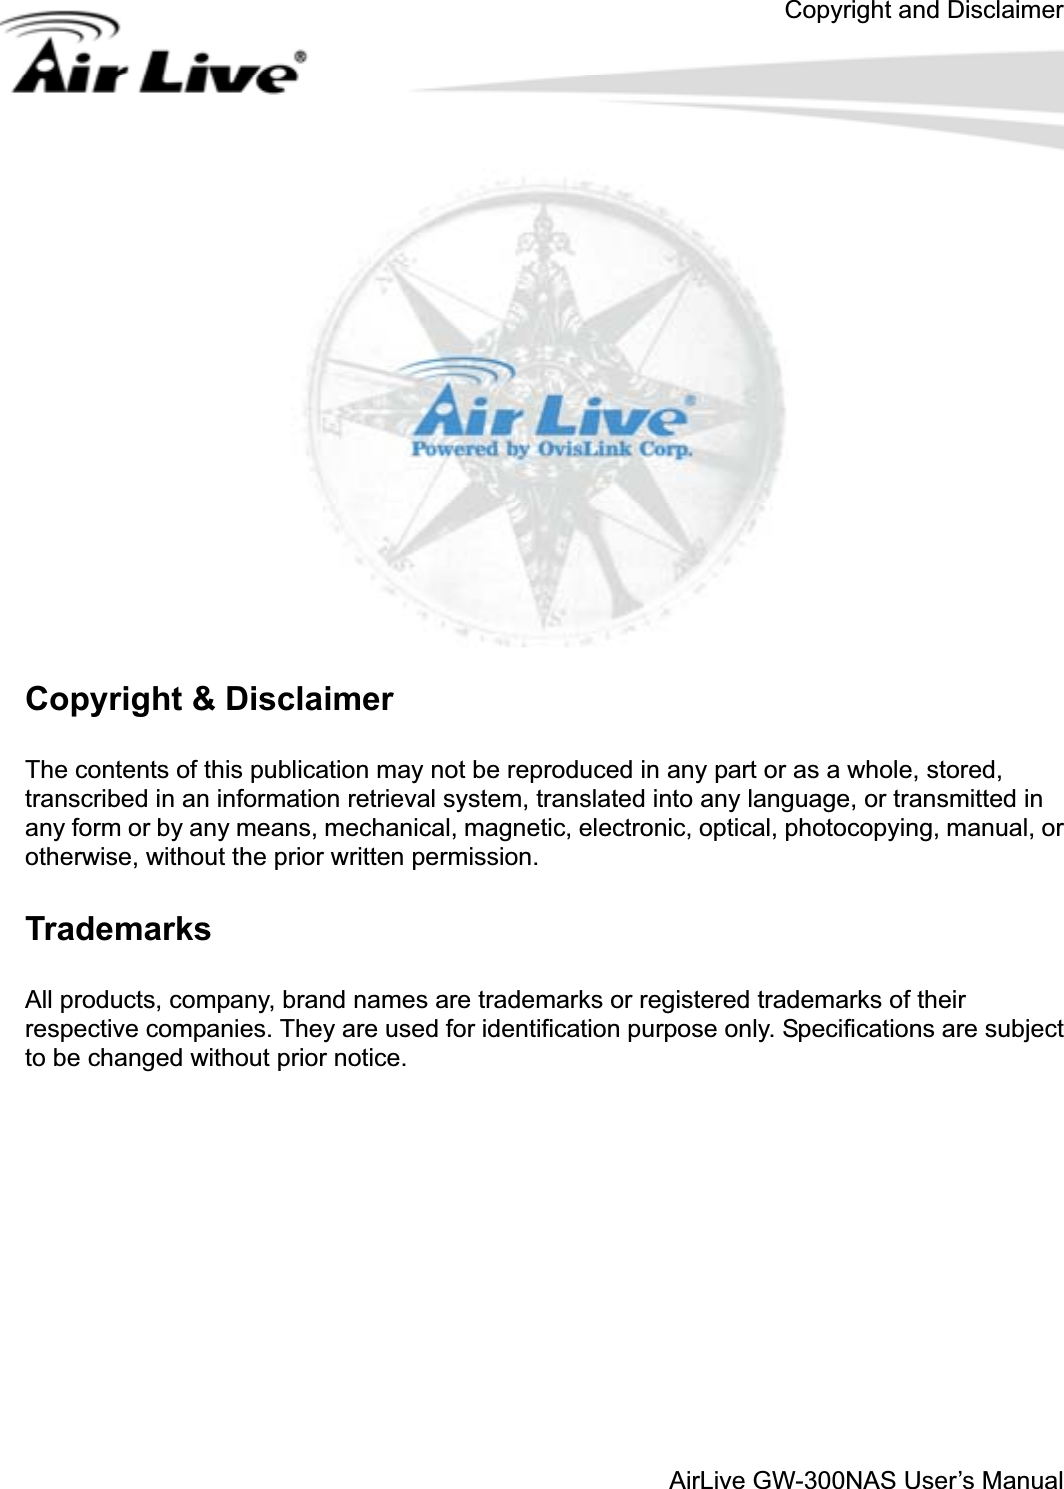 Copyright and DisclaimerAirLive GW-300NAS User’s ManualCopyright &amp; Disclaimer The contents of this publication may not be reproduced in any part or as a whole, stored, transcribed in an information retrieval system, translated into any language, or transmitted in any form or by any means, mechanical, magnetic, electronic, optical, photocopying, manual, or otherwise, without the prior written permission. Trademarks All products, company, brand names are trademarks or registered trademarks of their respective companies. They are used for identification purpose only. Specifications are subject to be changed without prior notice. 